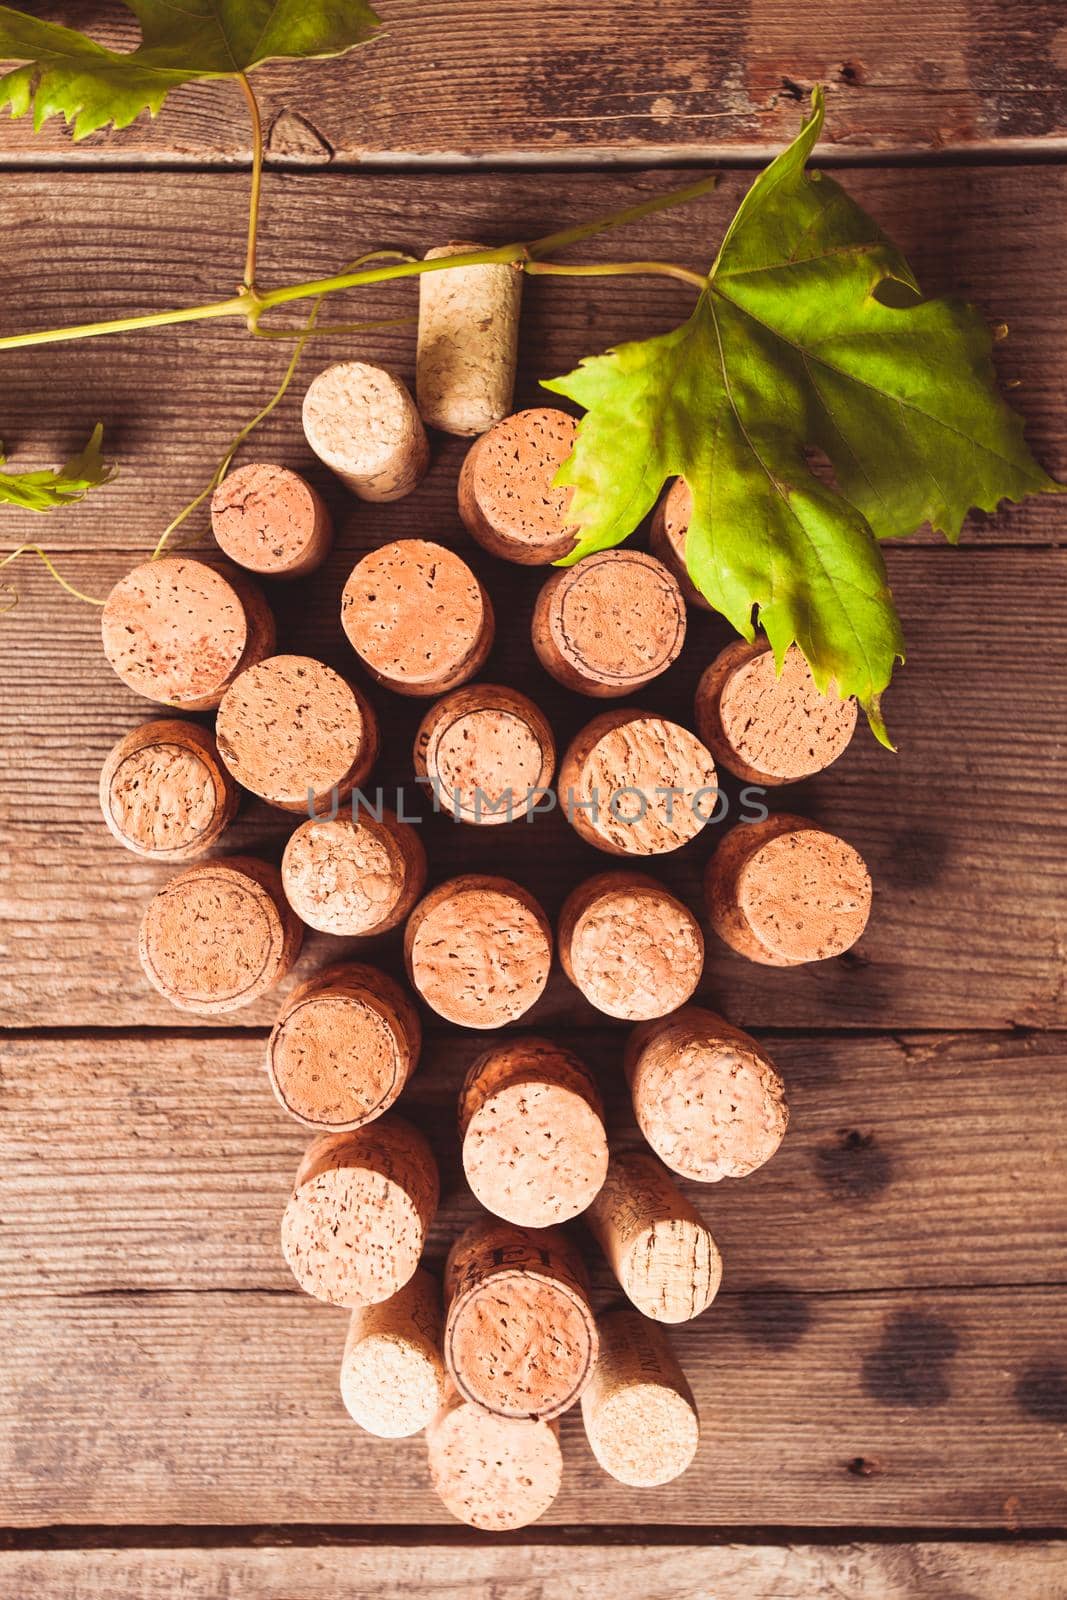 Wine corks on table by oksix